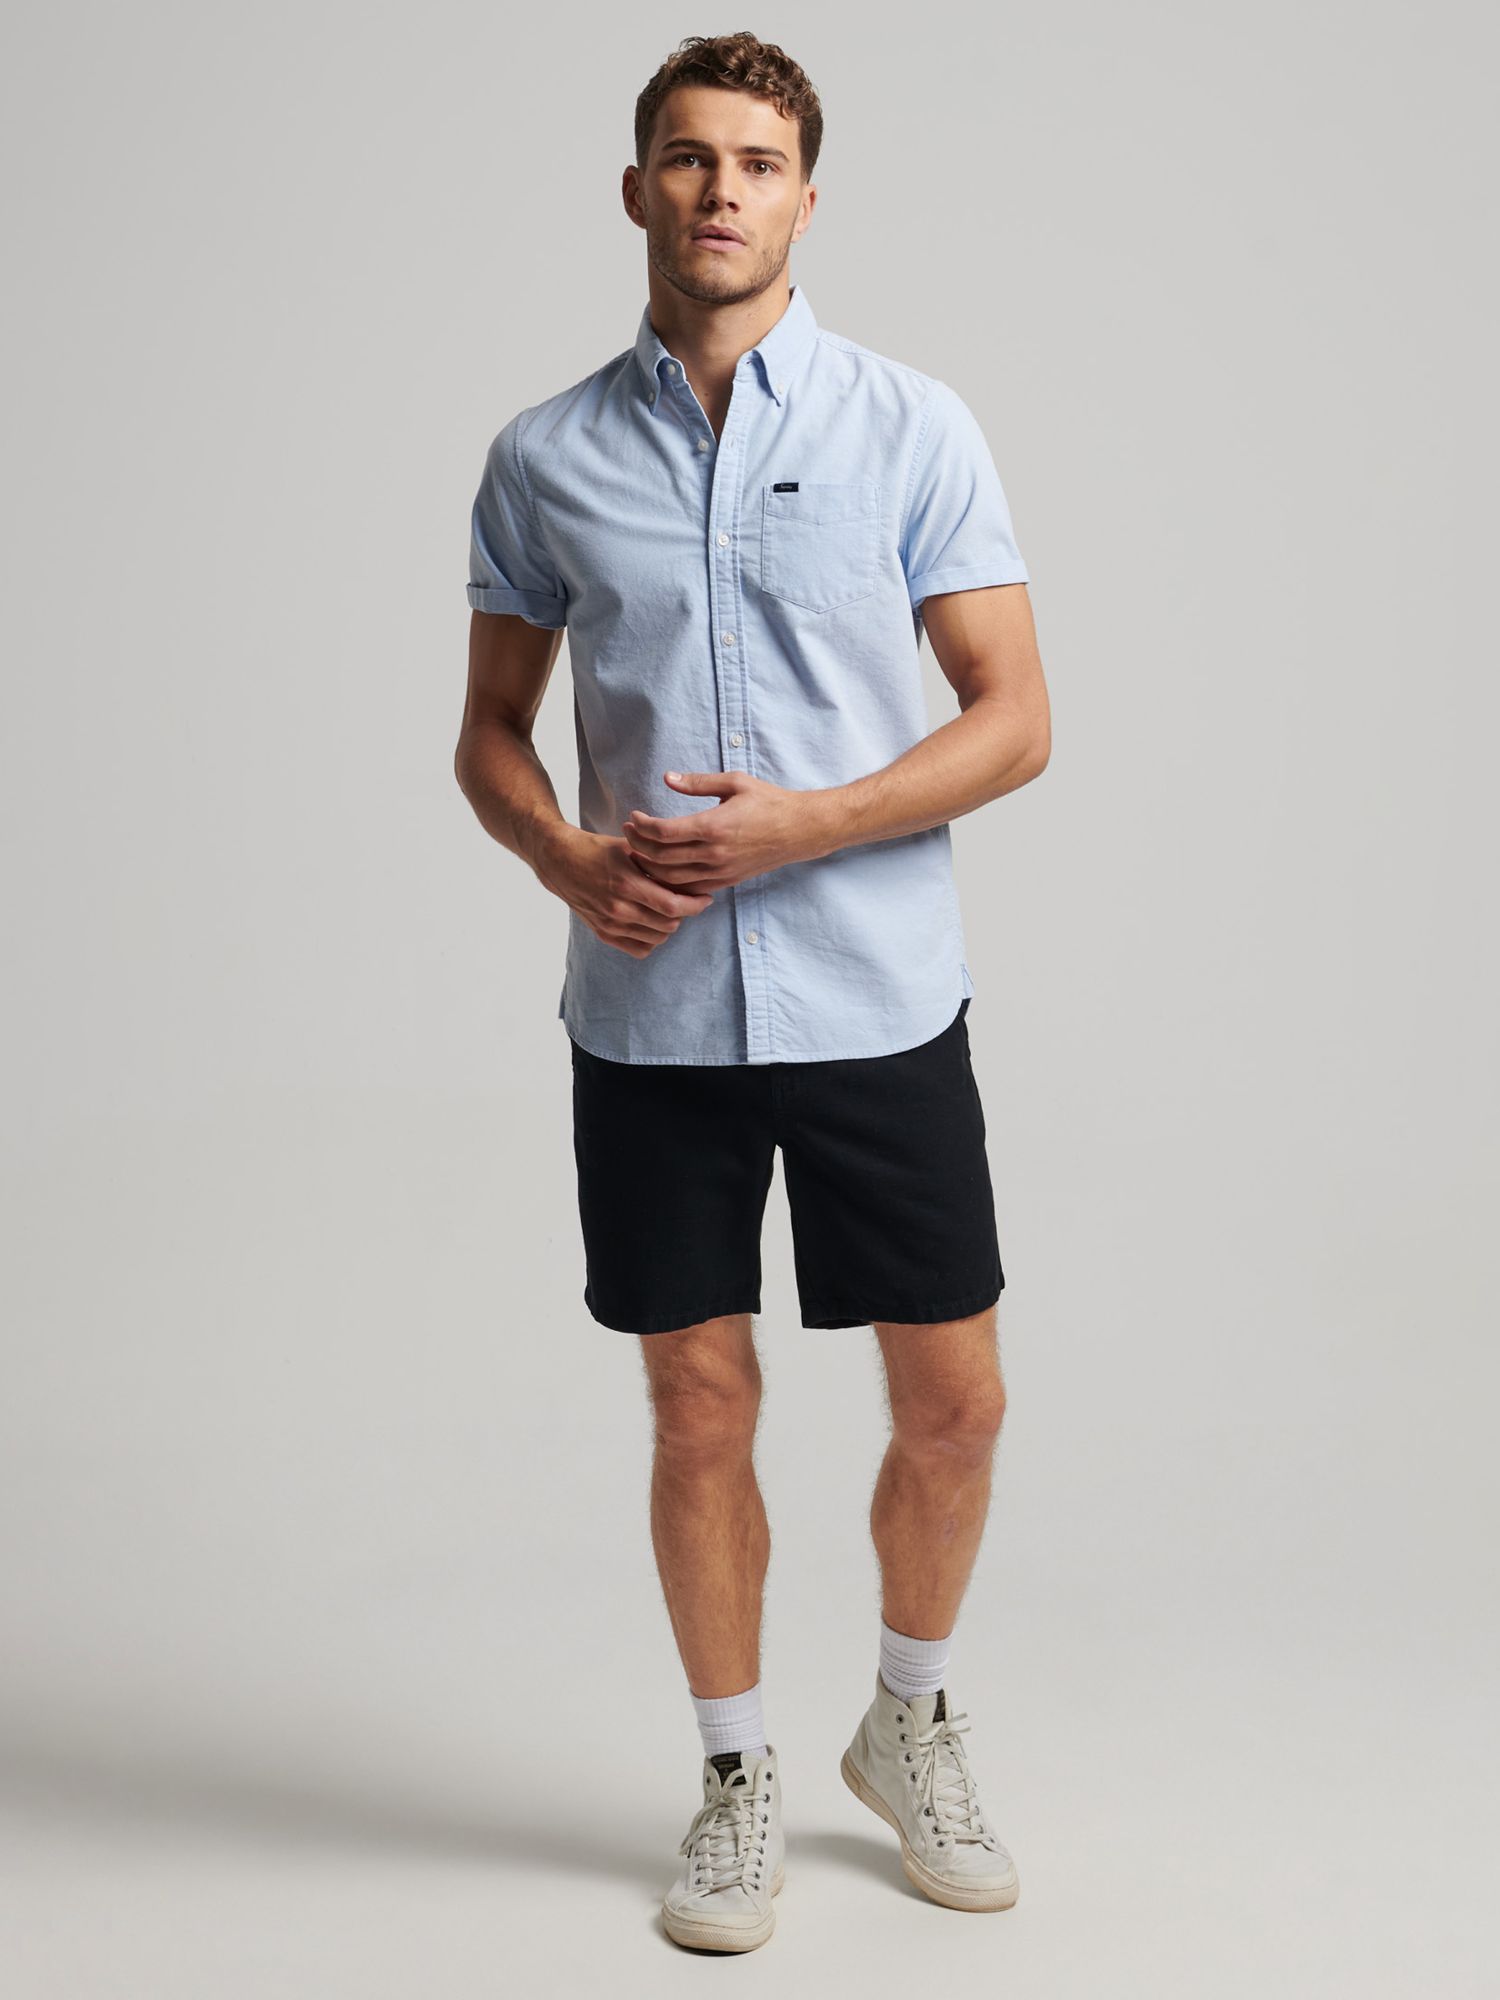 Superdry Oxford Short Sleeve Shirt, Classic Blue at John Lewis & Partners